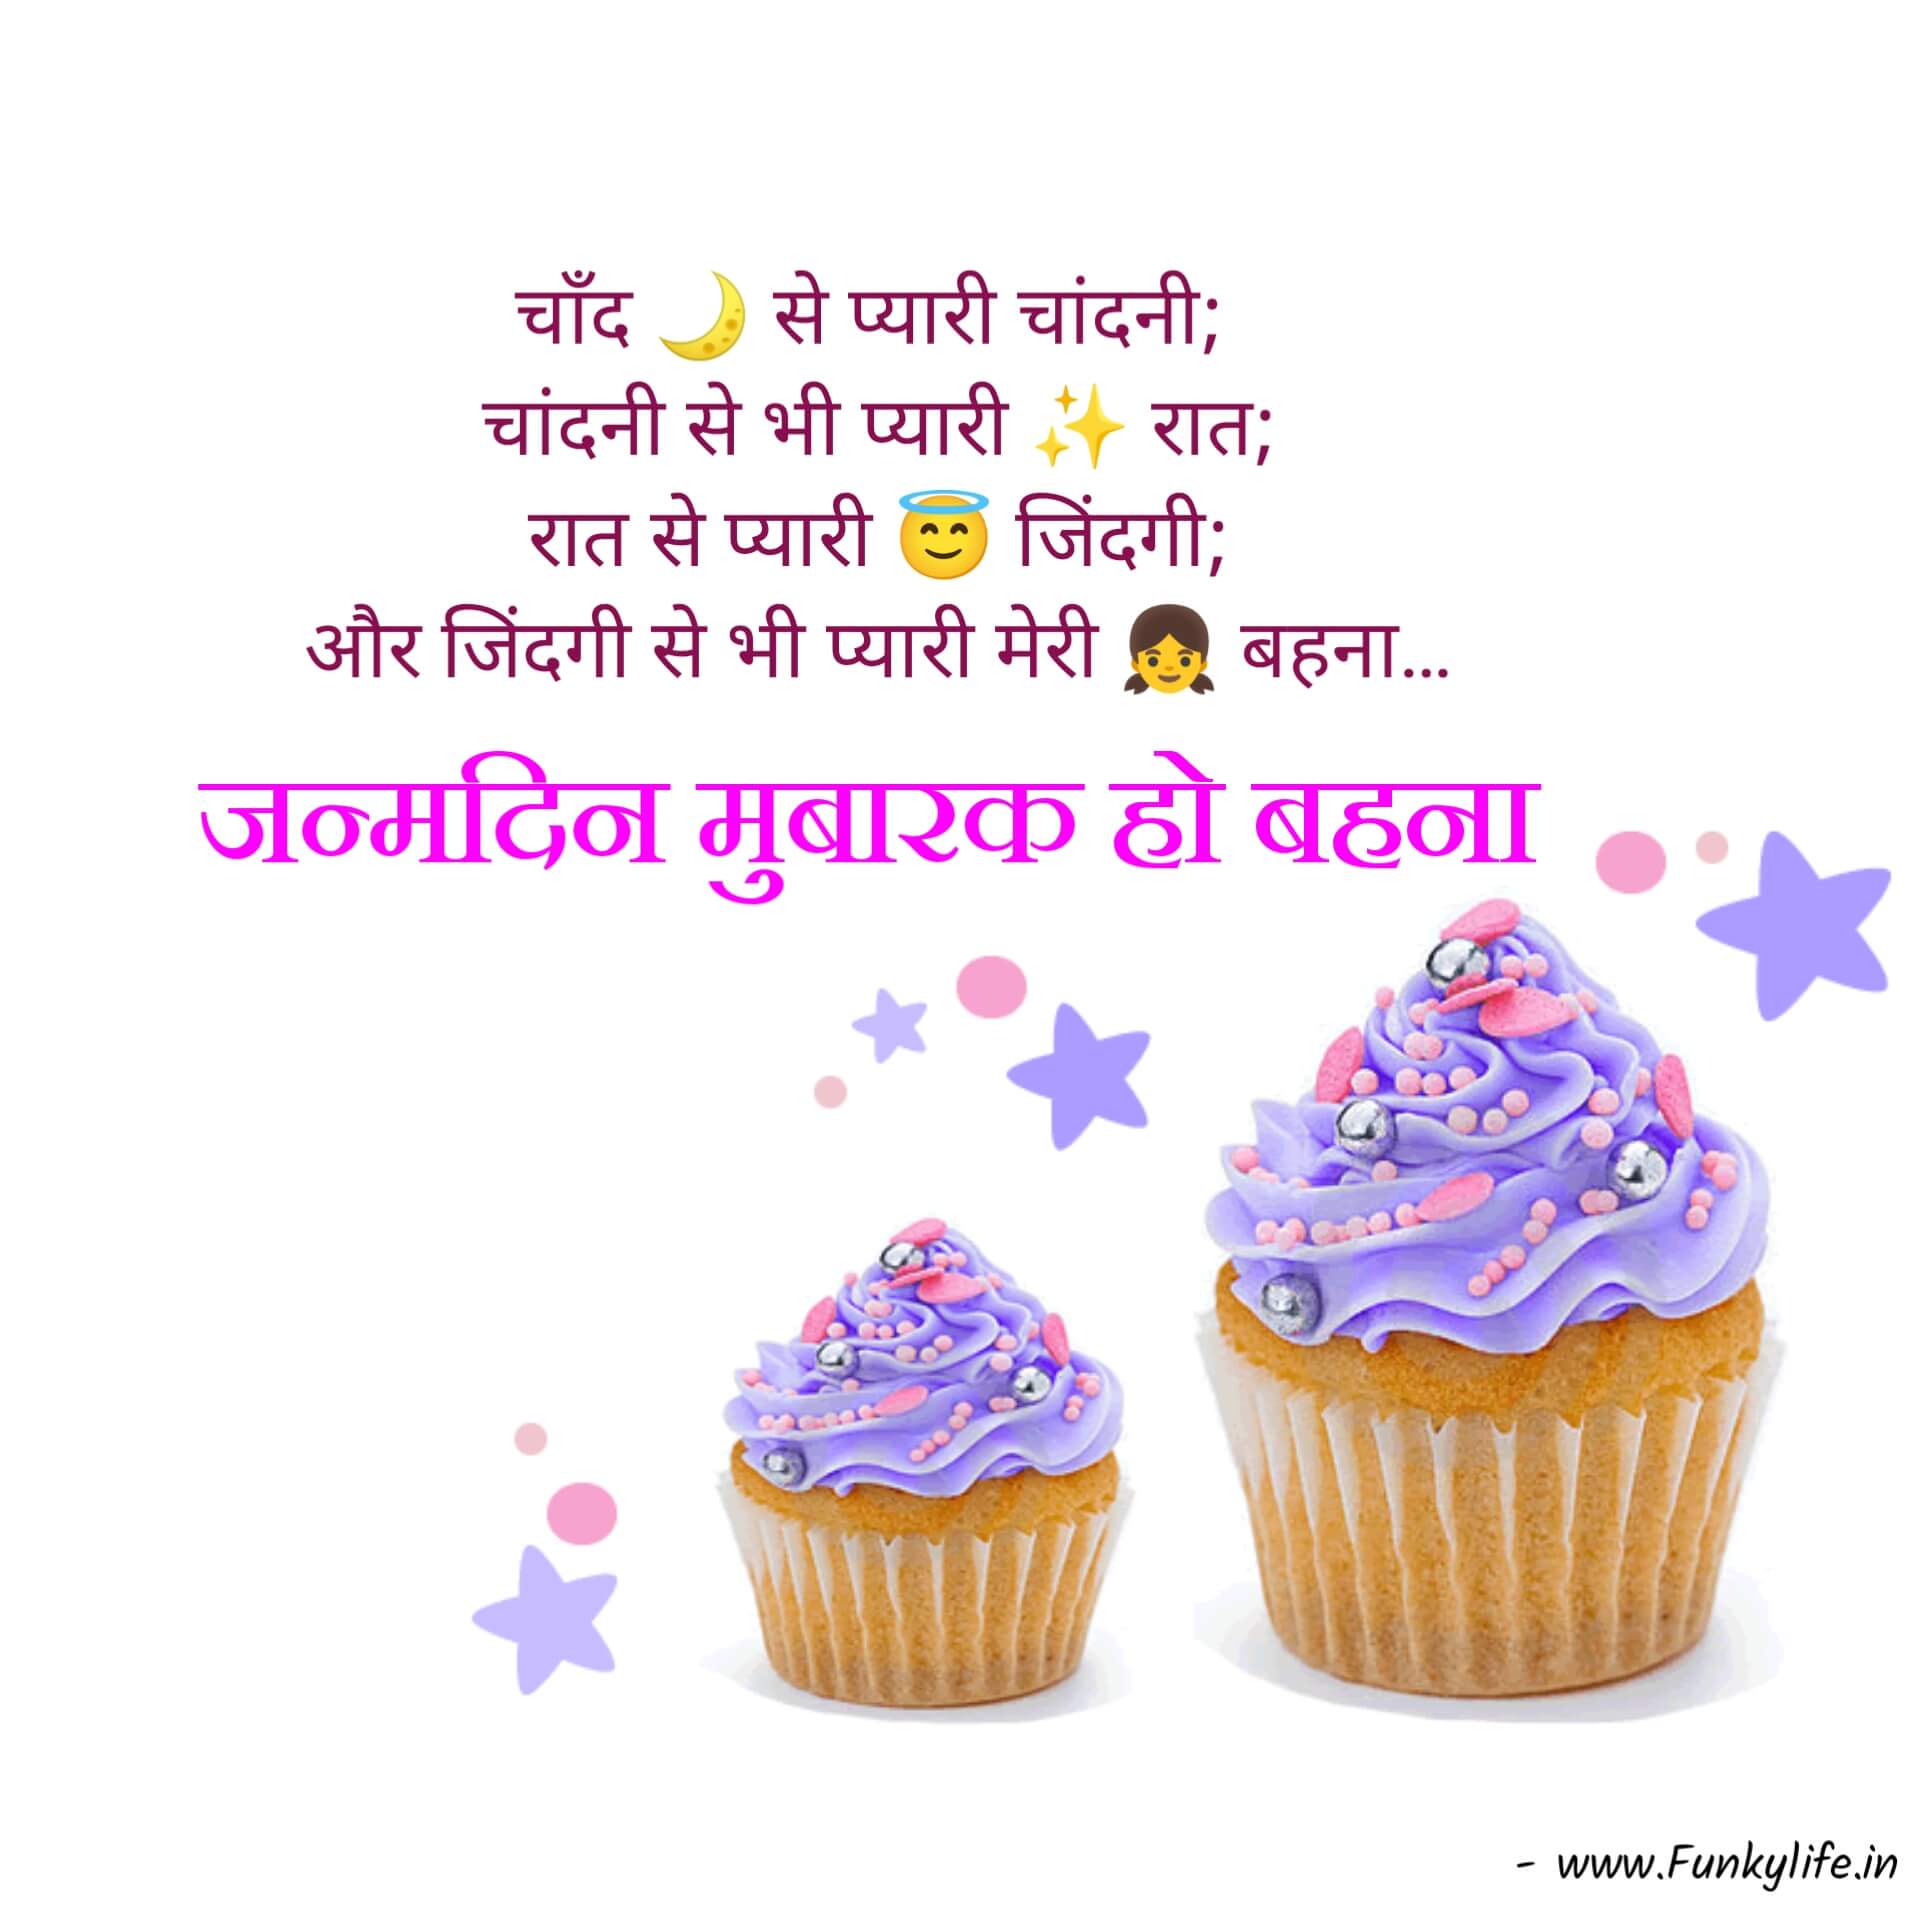 Happy Birthday Wishes in Hindi for Sister